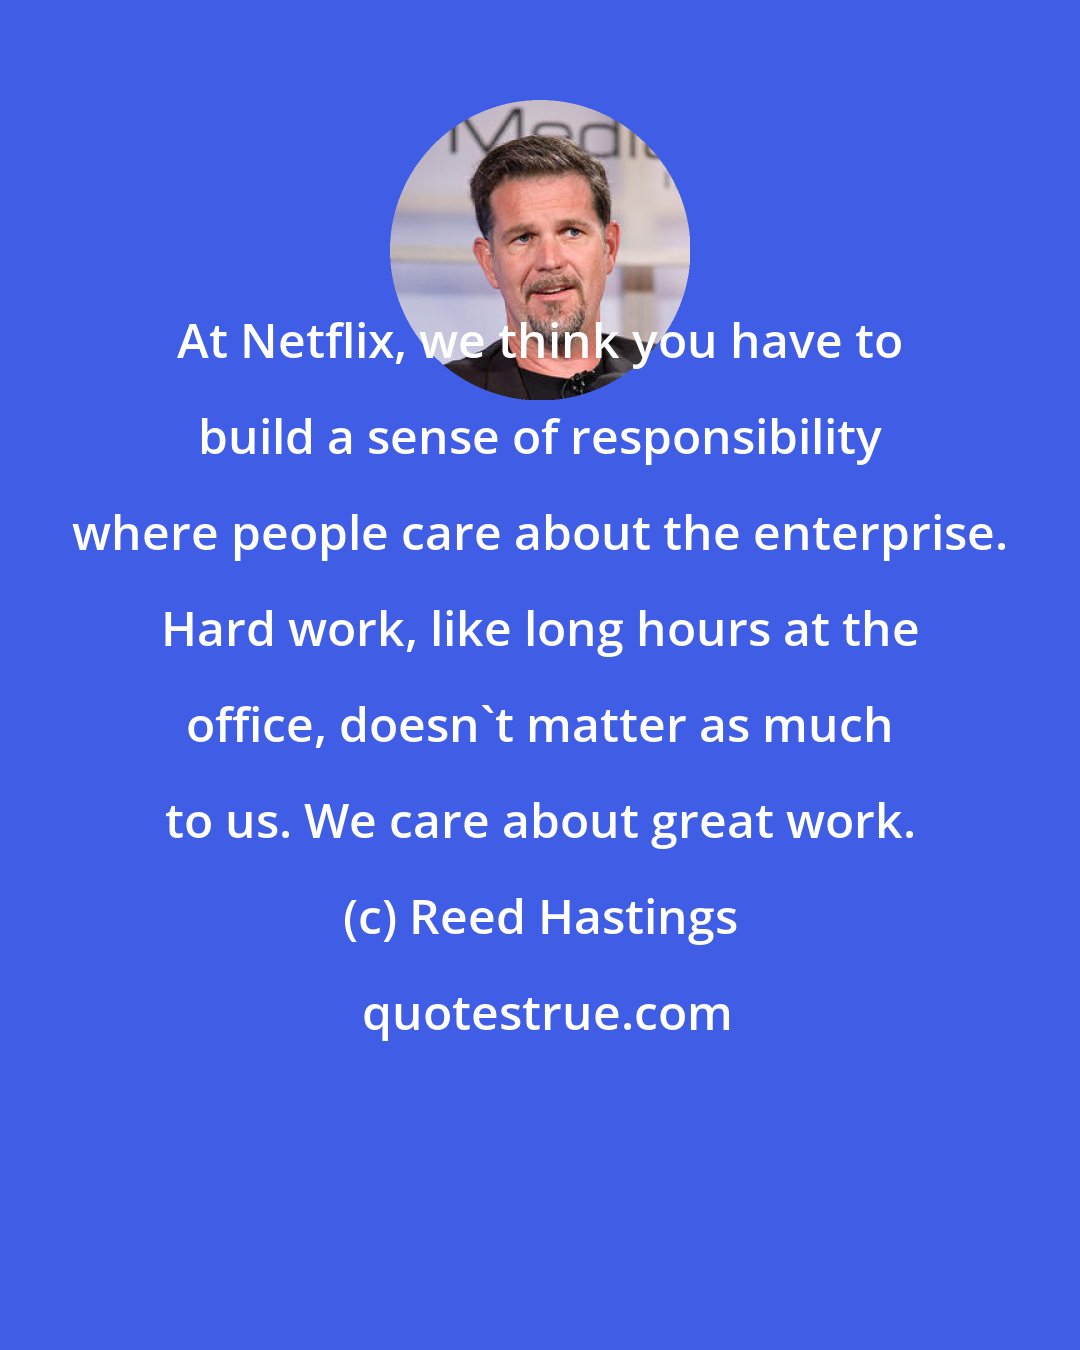 Reed Hastings: At Netflix, we think you have to build a sense of responsibility where people care about the enterprise. Hard work, like long hours at the office, doesn't matter as much to us. We care about great work.